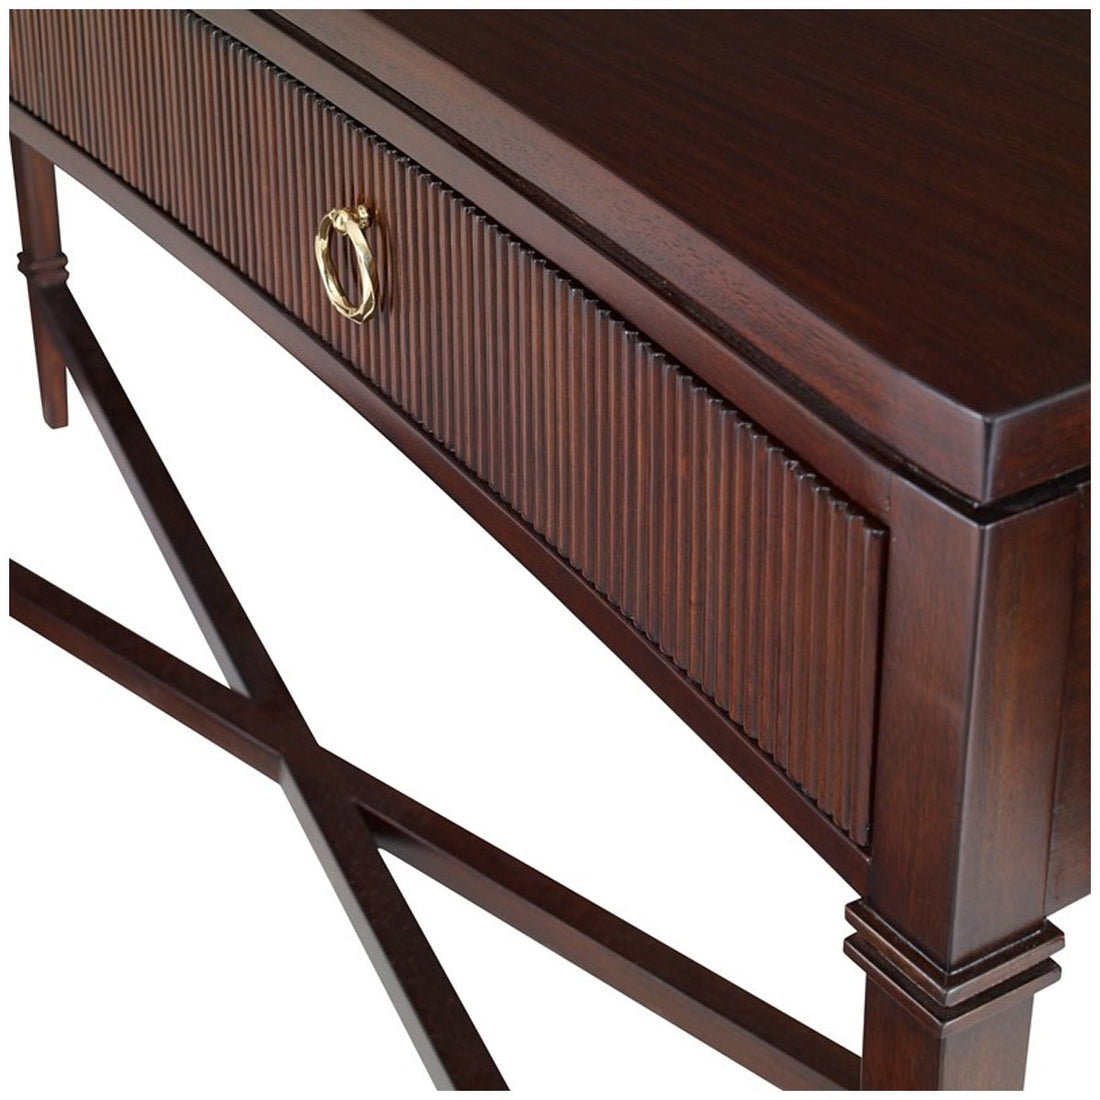 Ambella Home Reeded Console Table